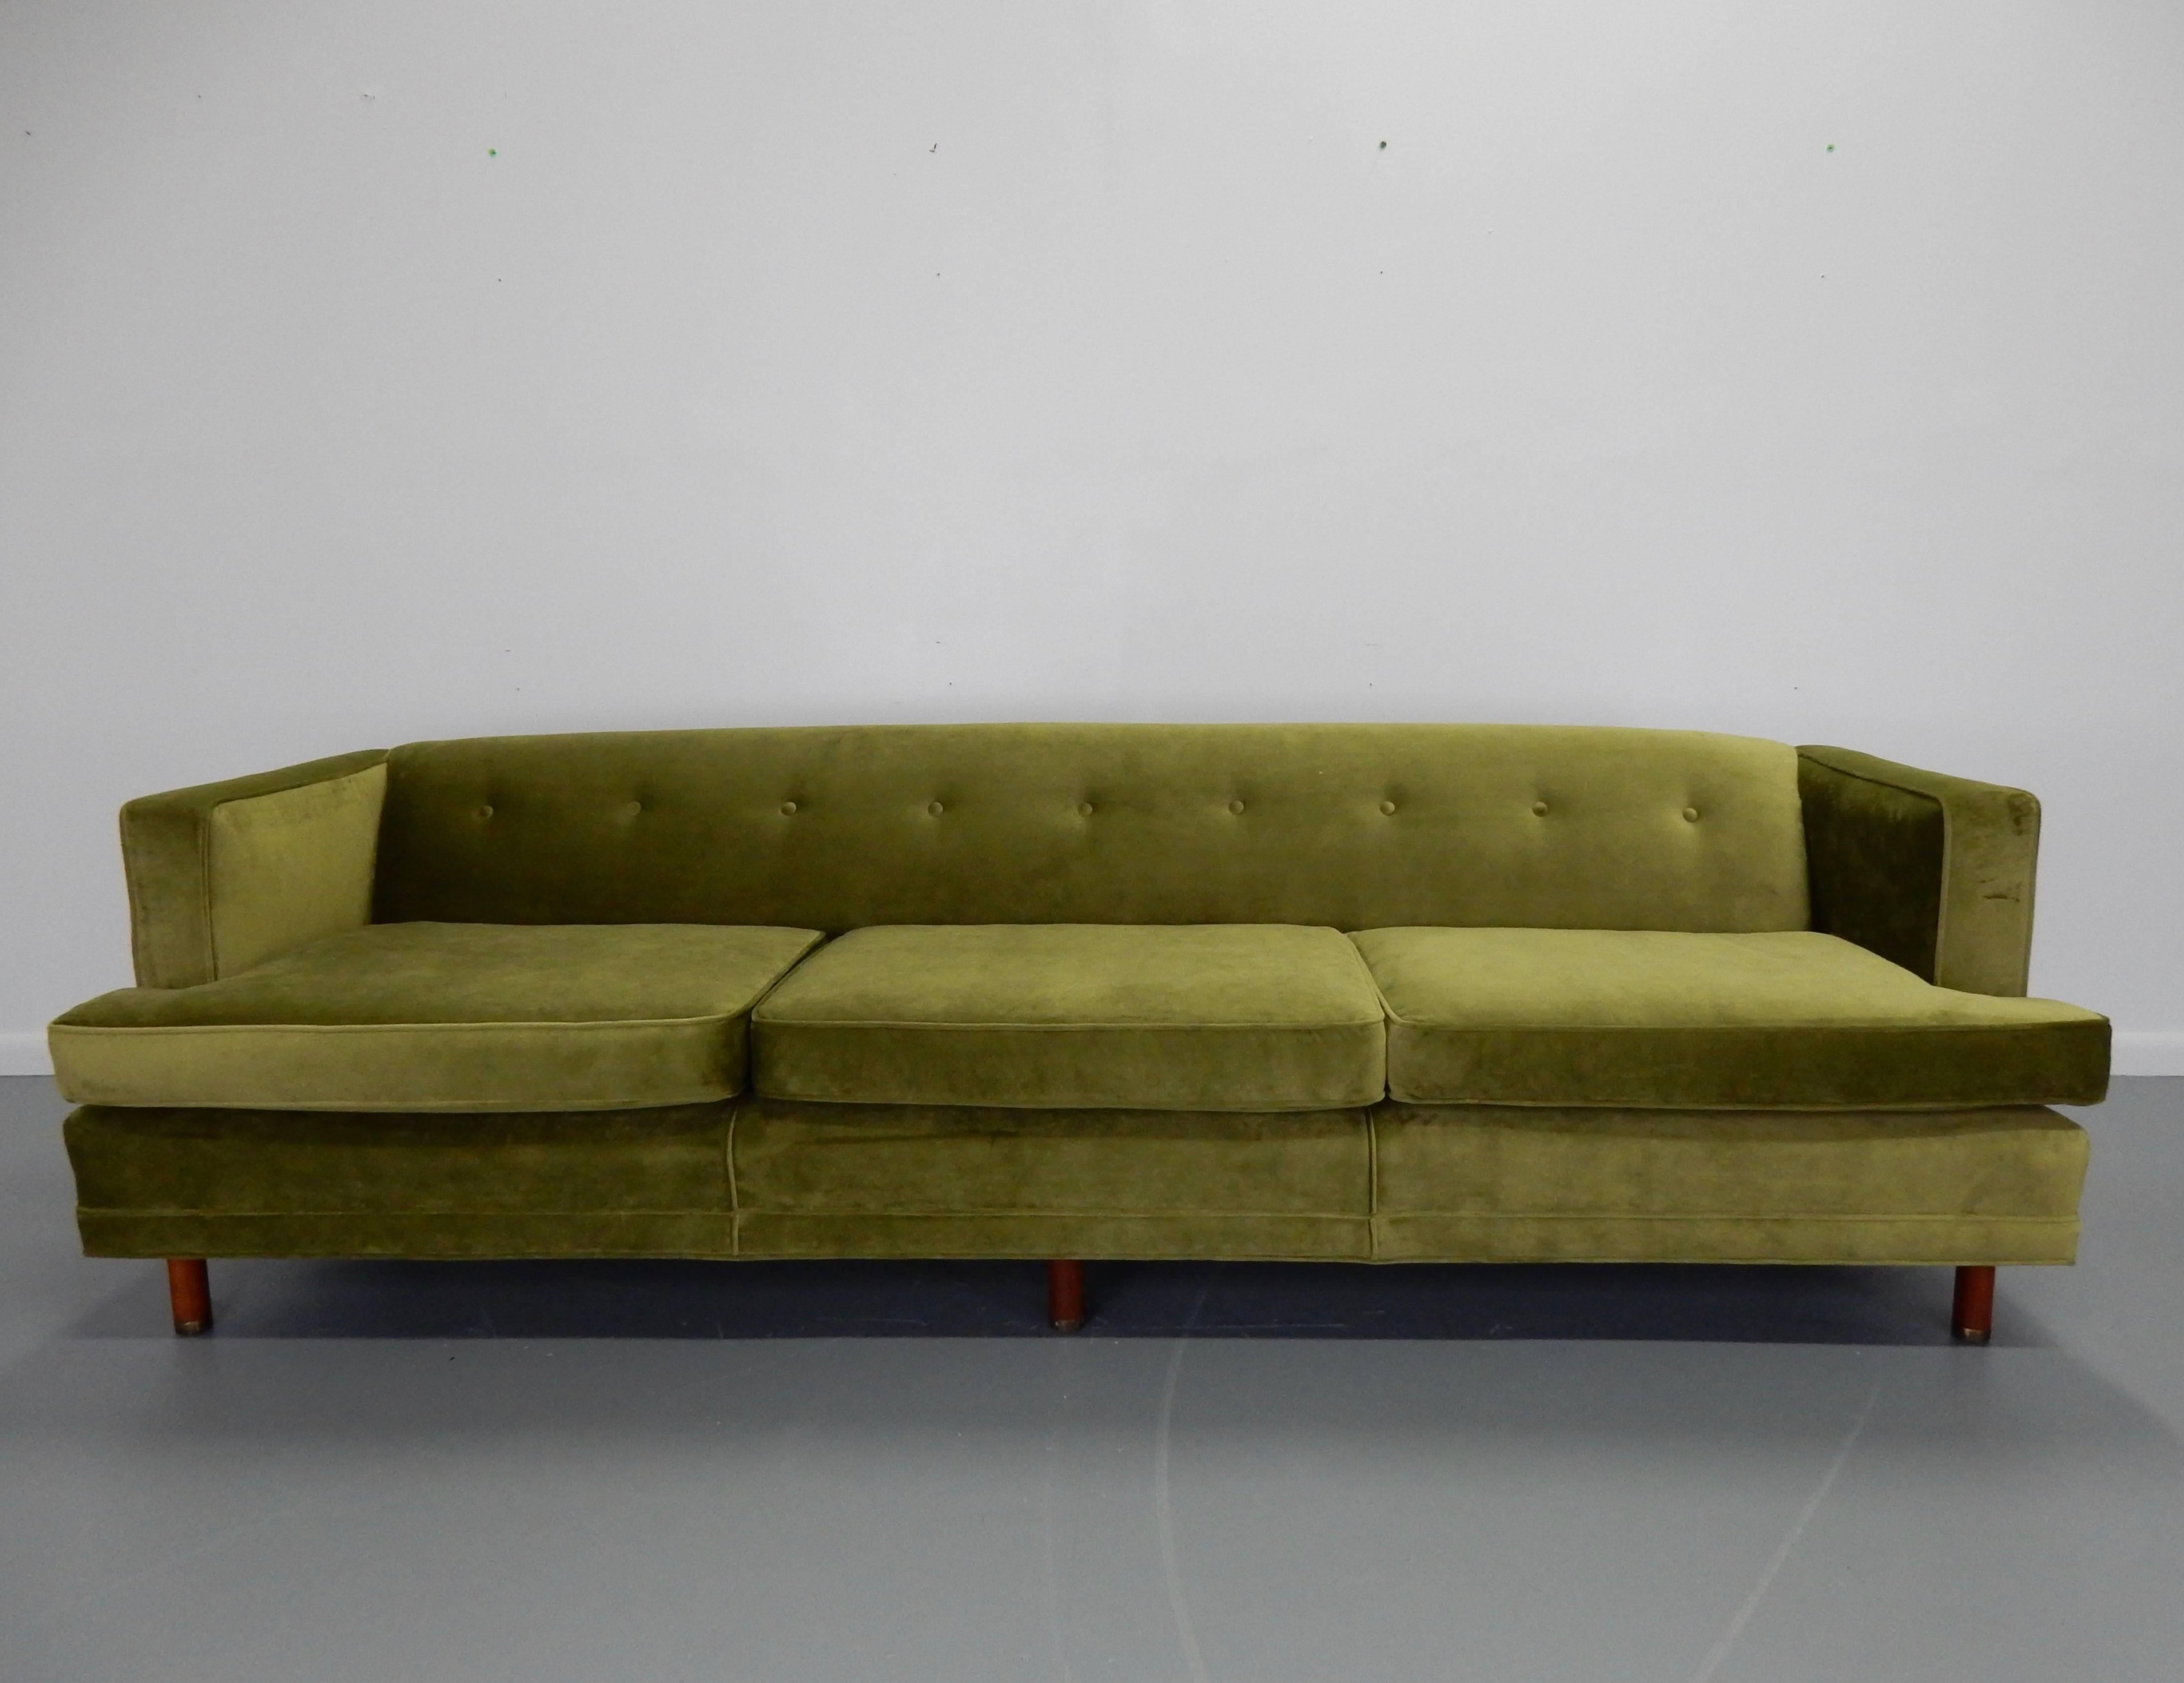 1960s tuxedo sofa upholstered in lovely shade of green velvet. The generous size of this sofa makes this a truly special piece for any room.


Edward Wormley worked in that extraordinary period with Harvey Probber, Vladimir Kagan, George Nelson,